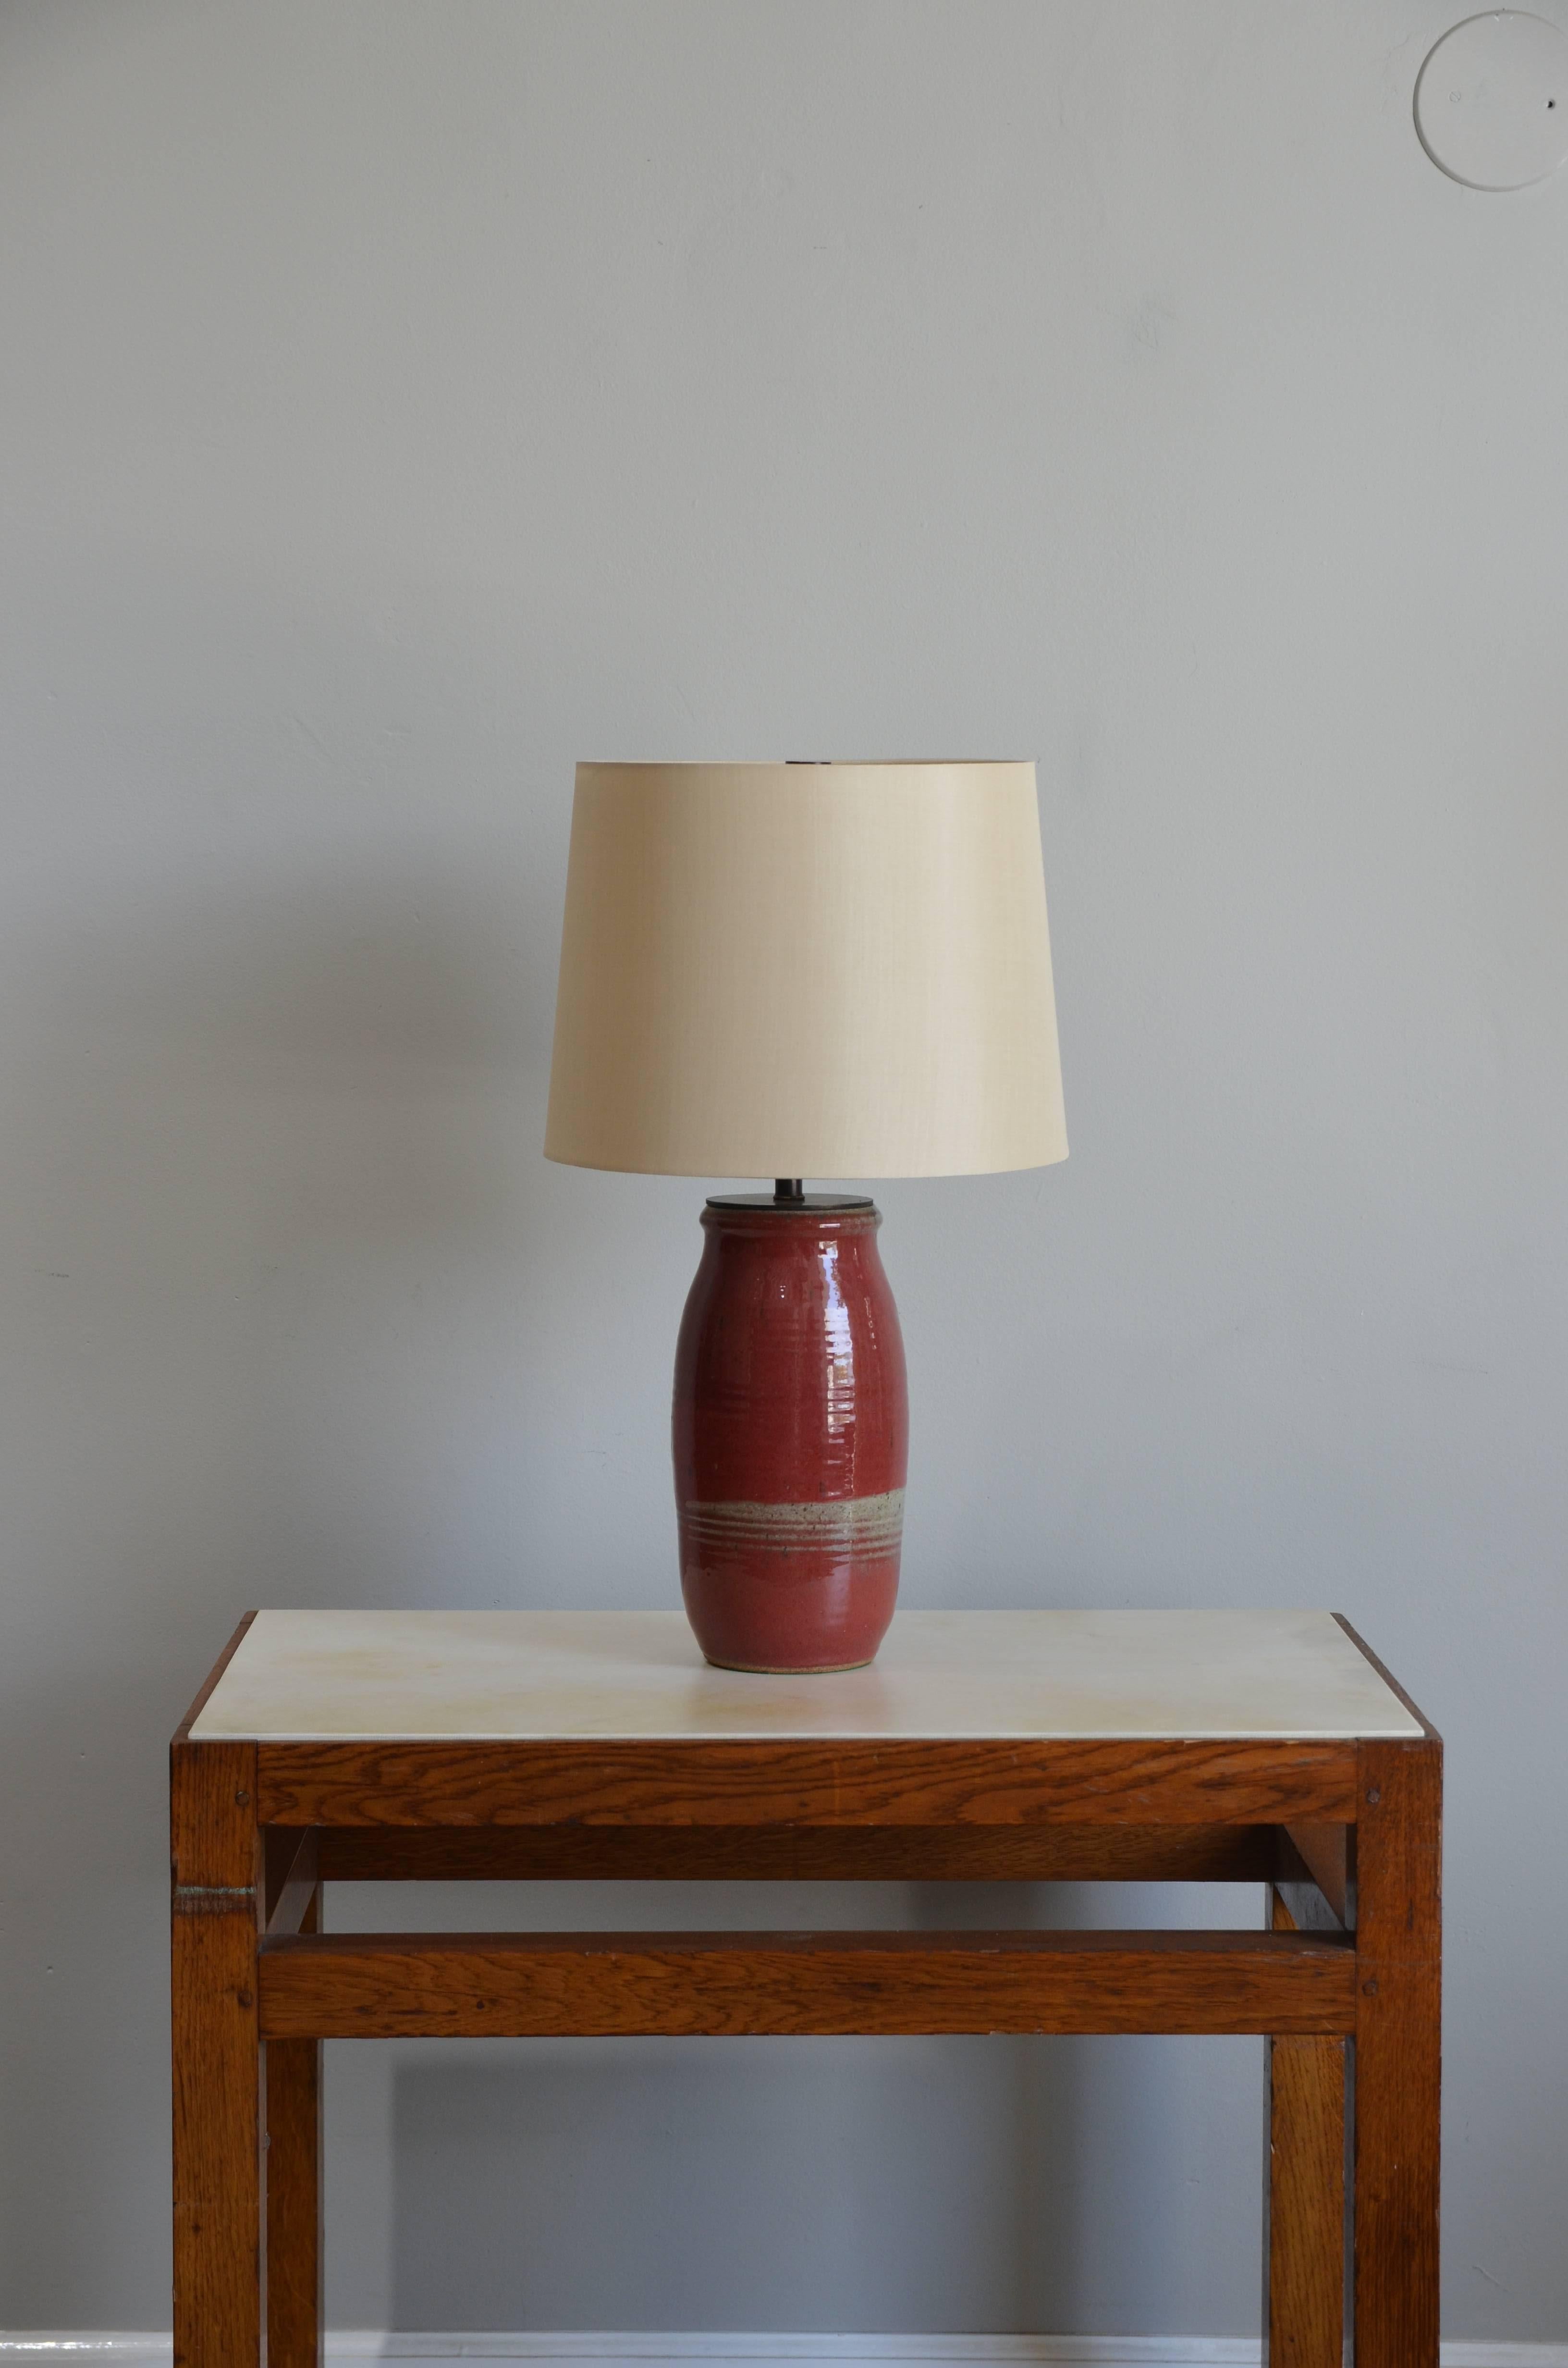 Chic oxblood lamp with custom cream silk shade. Beautiful glaze.

The dimensions are the overall dimensions of the lamp with the shade.

Lamp body is 5 1/2 in. diameter x 12 1/2 in. tall

Diameter of top of shade: 12